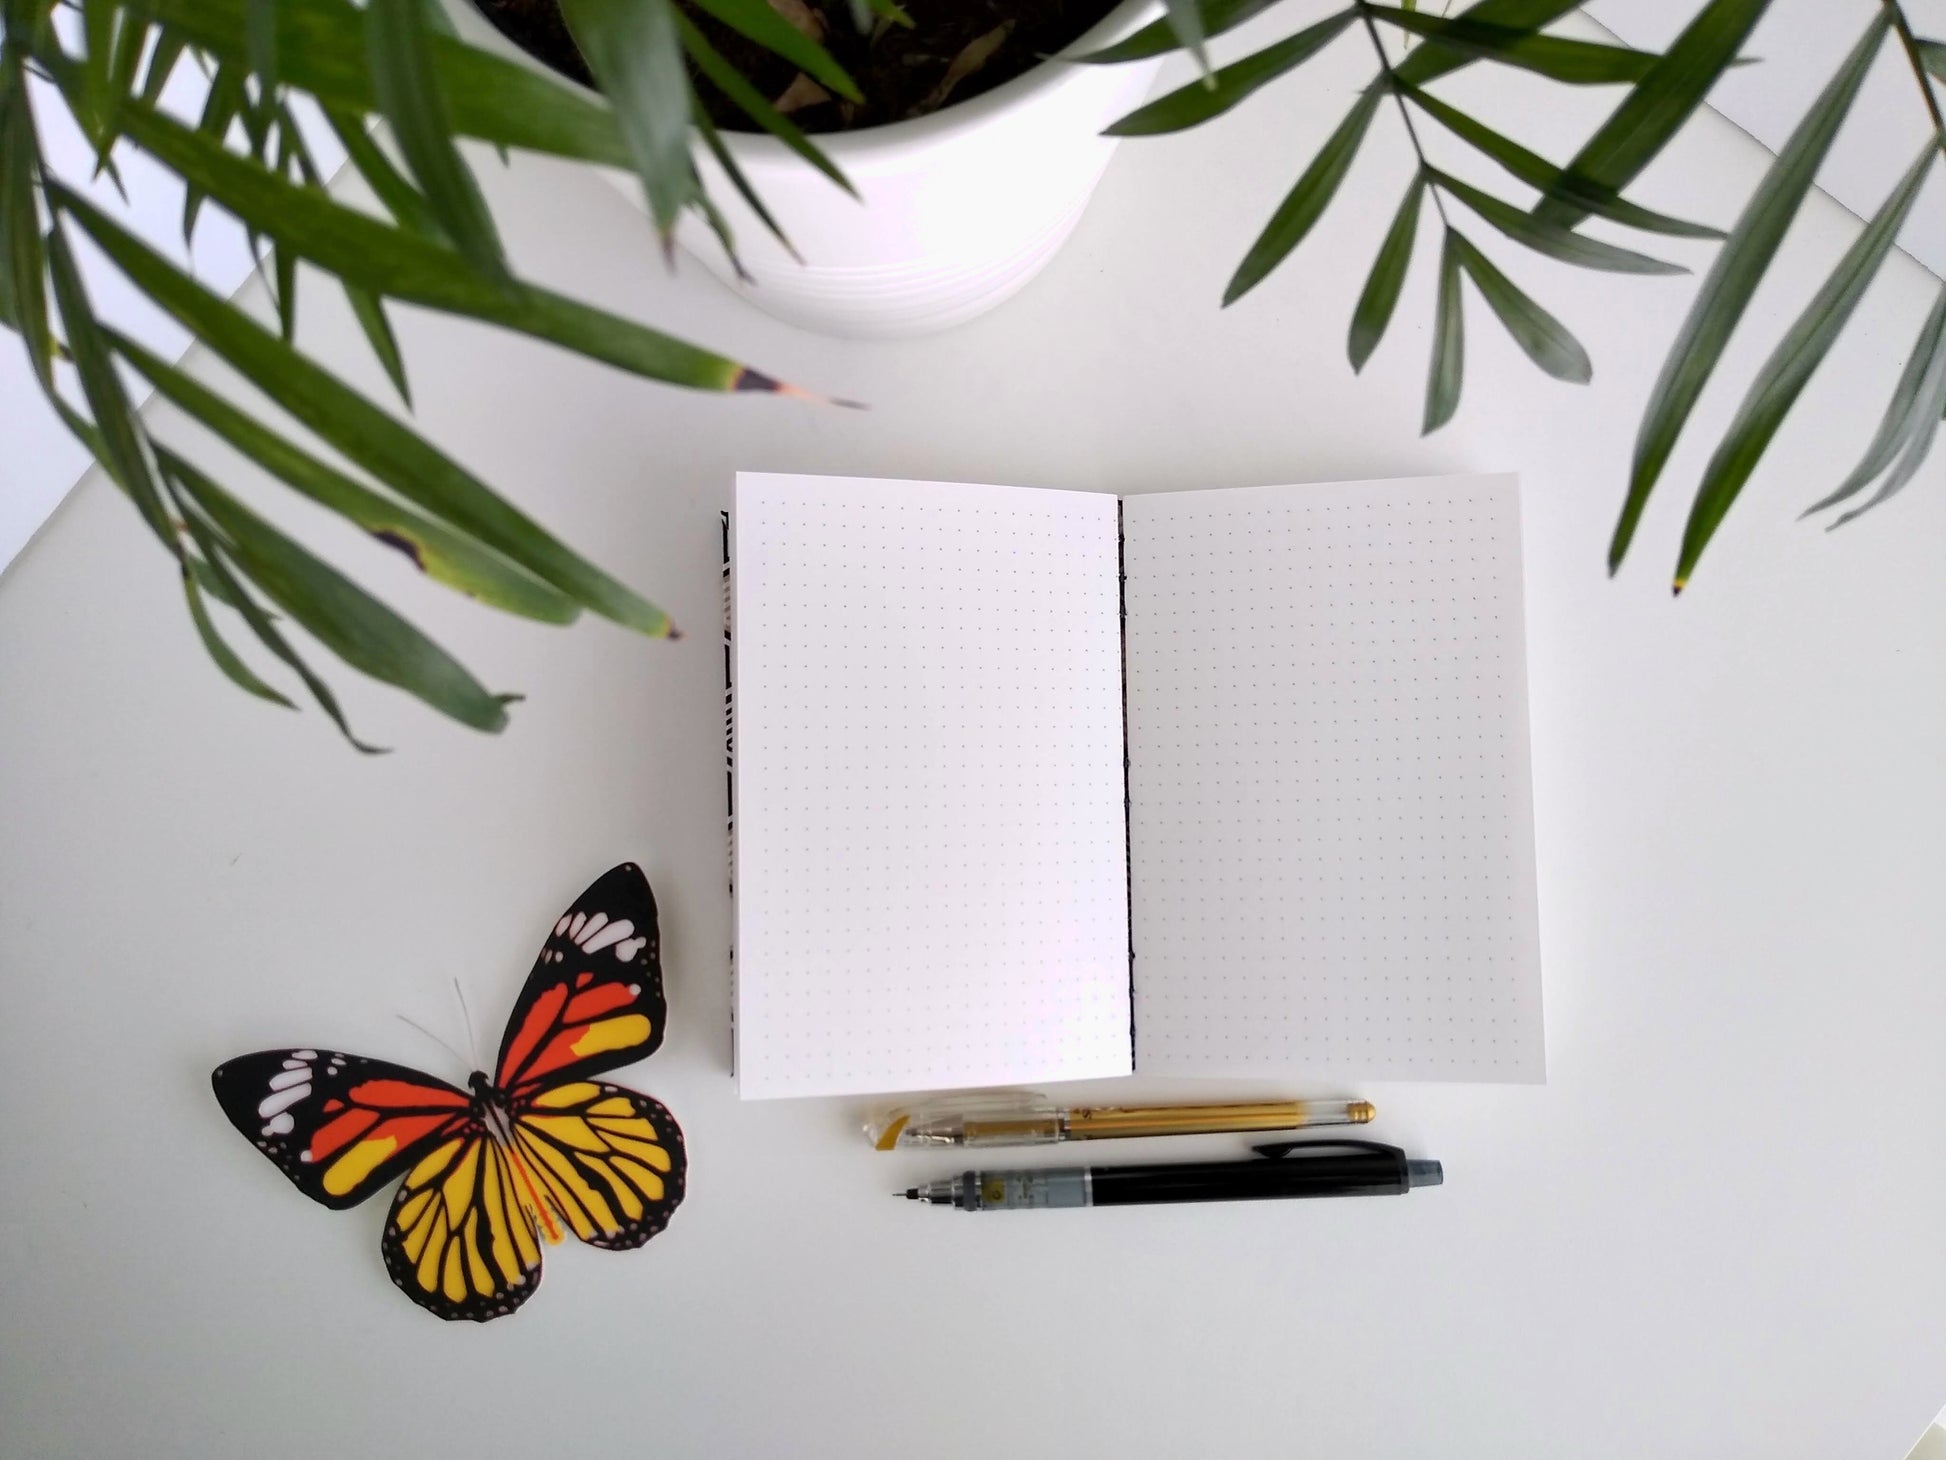 Handmade journal, opened up flat showing pages with a dotted grid on it. It's laying on a desk next to a potted plant, a gold pen and a black mechanical pencil, and paper butterfly.